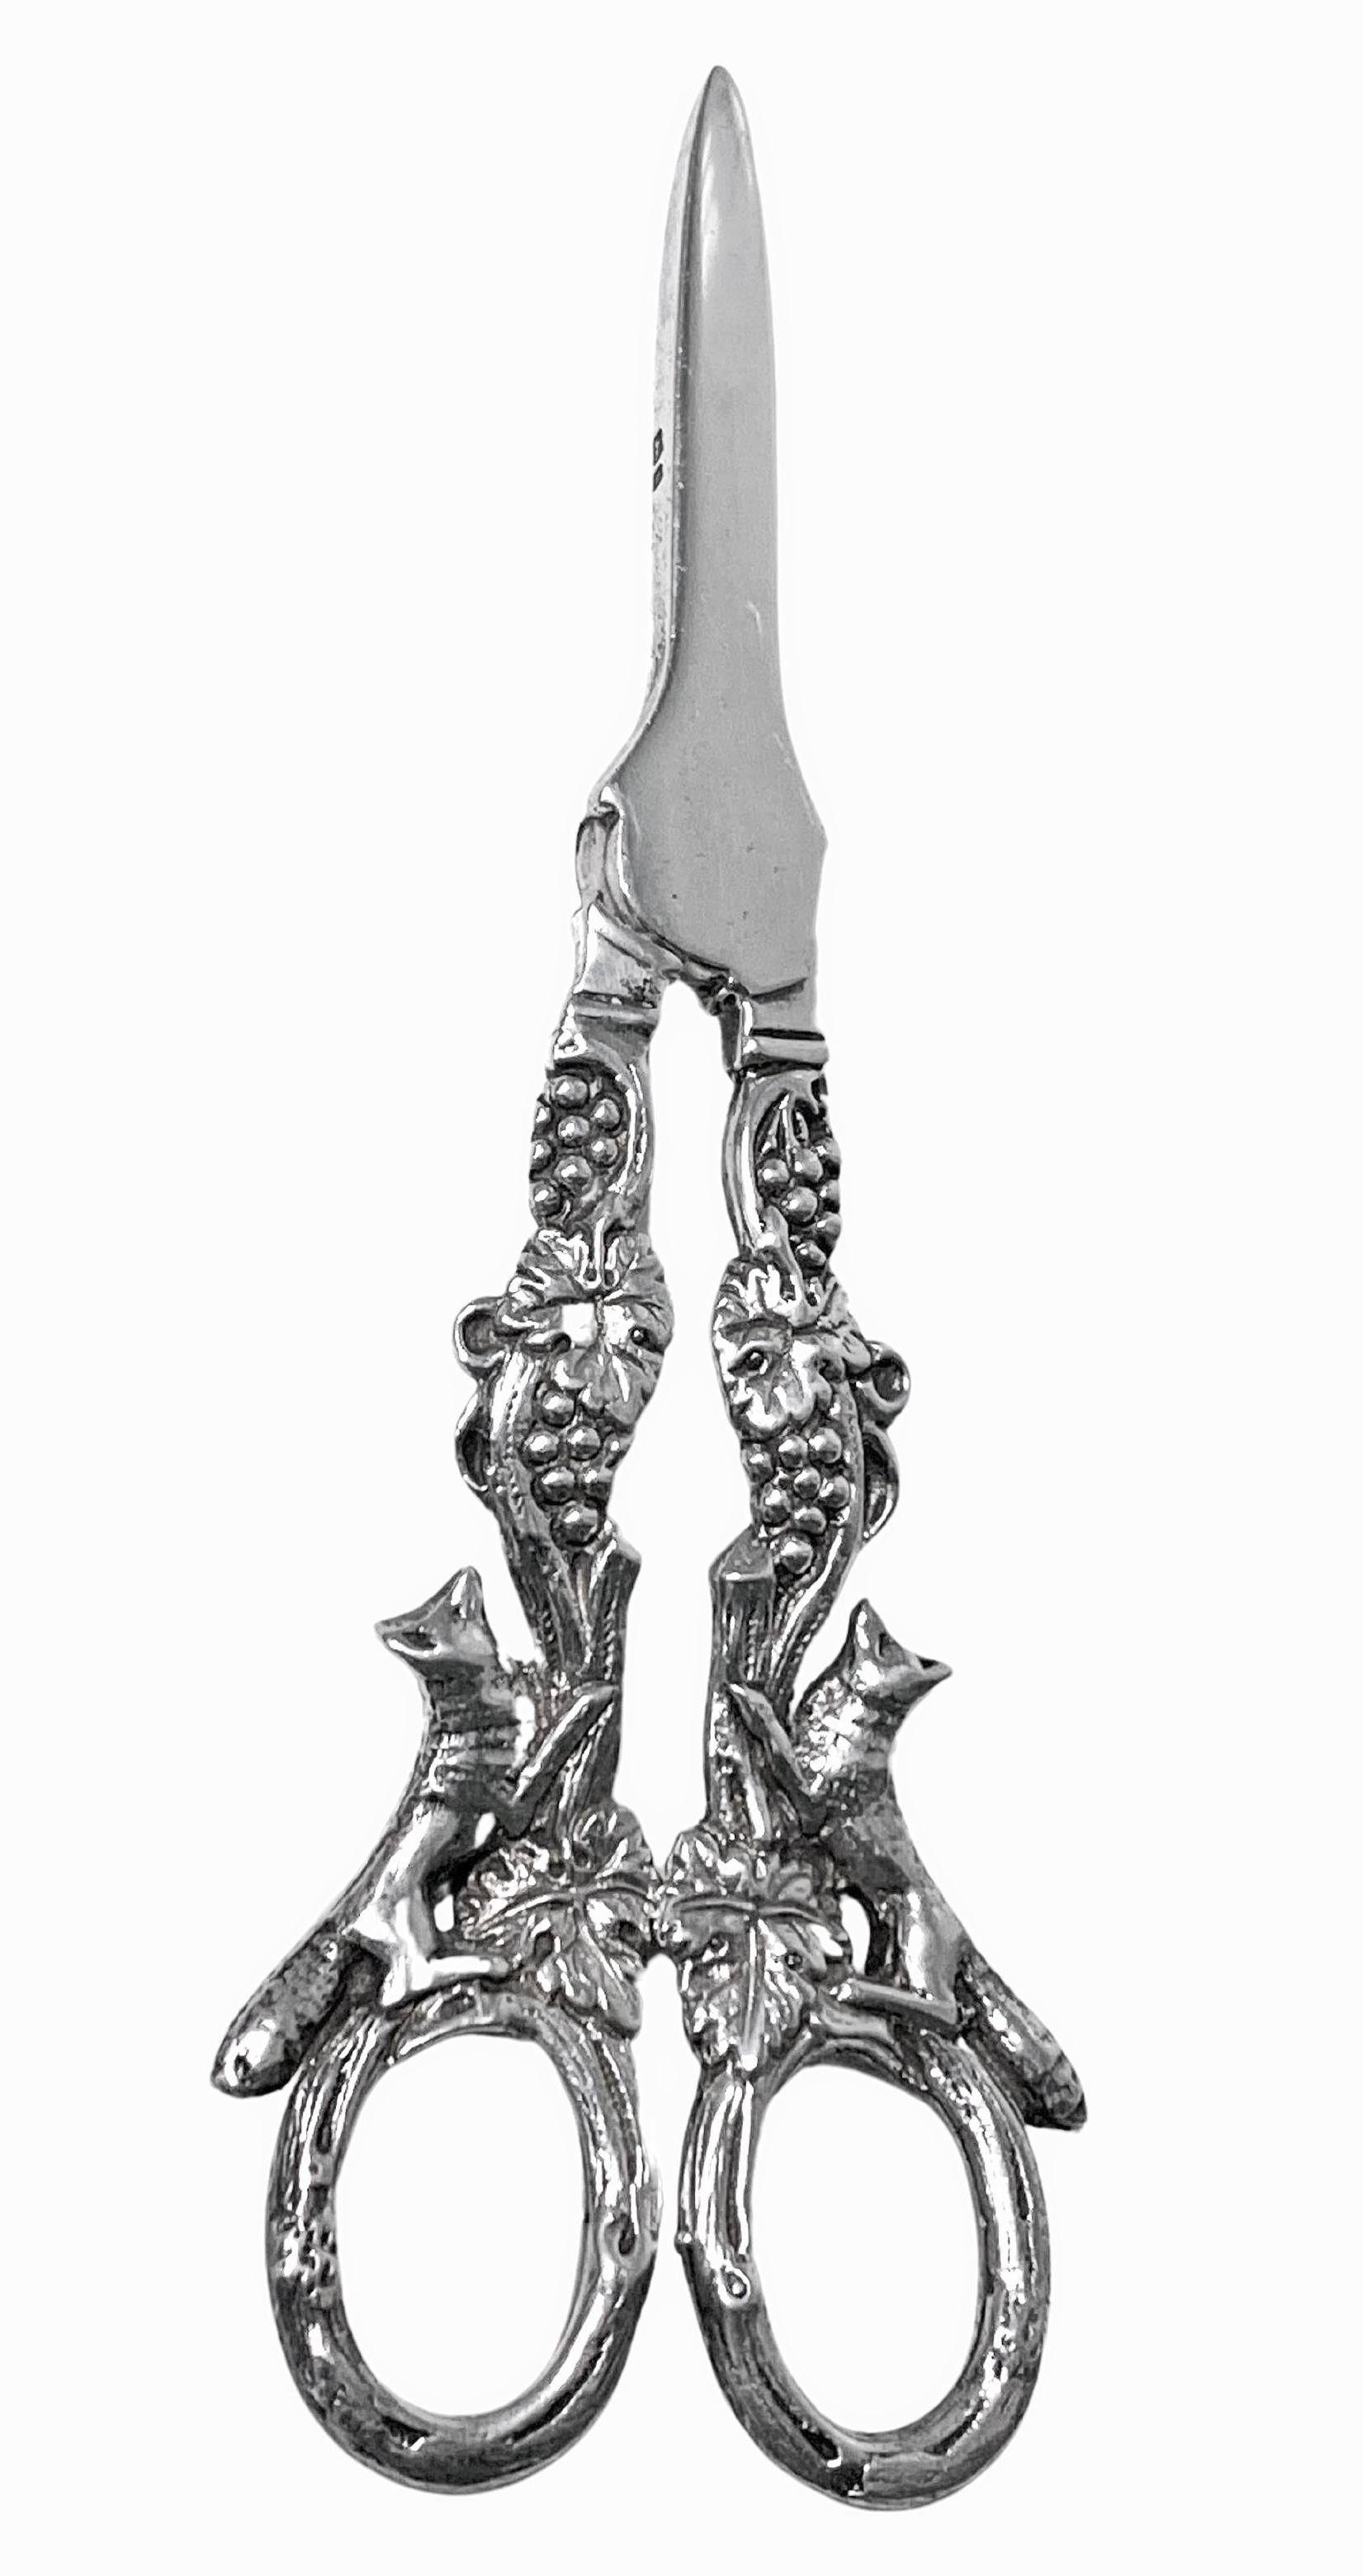 English Sterling Silver Grape Shears, running foxes, London  1